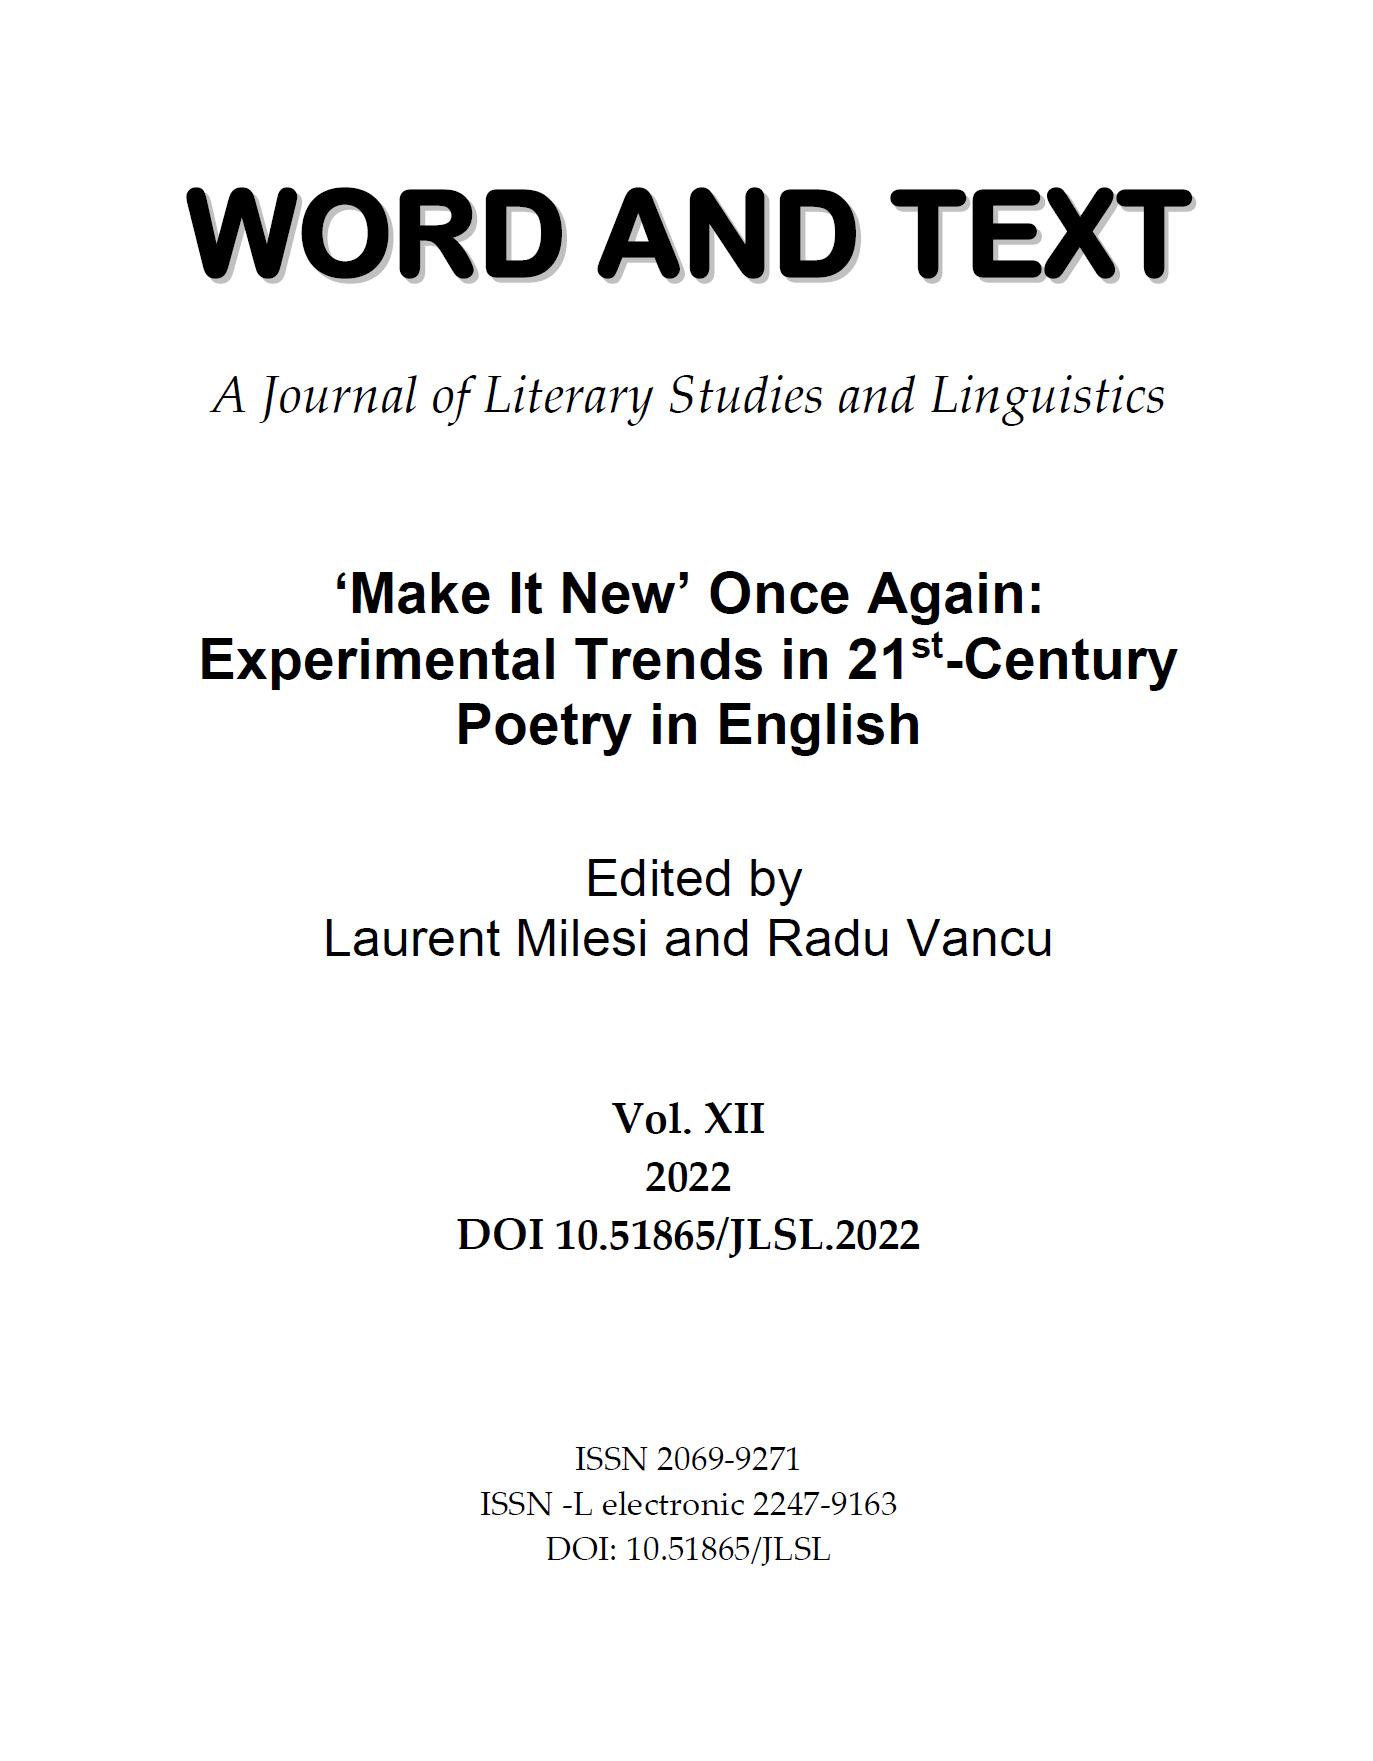 Introduction: ‘Make It New’ Once Again: Experimental Trends in 21st-Century Poetry in English Cover Image